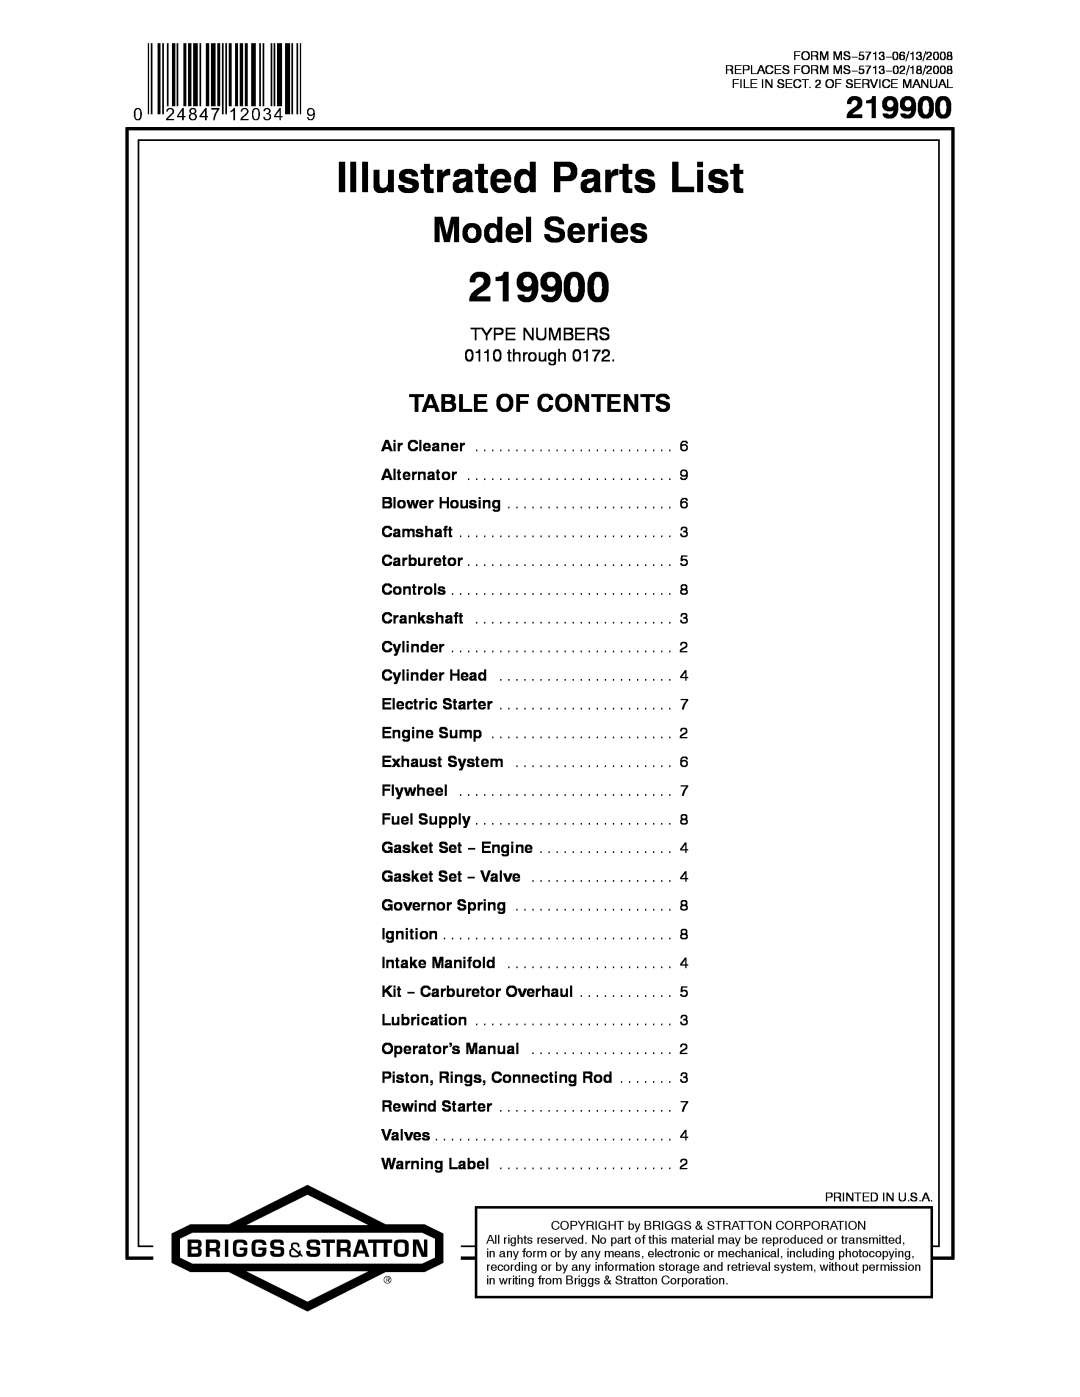 Snapper 219900 service manual Model Series, Illustrated Parts List, Table Of Contents, TYPE NUMBERS 0110 through 